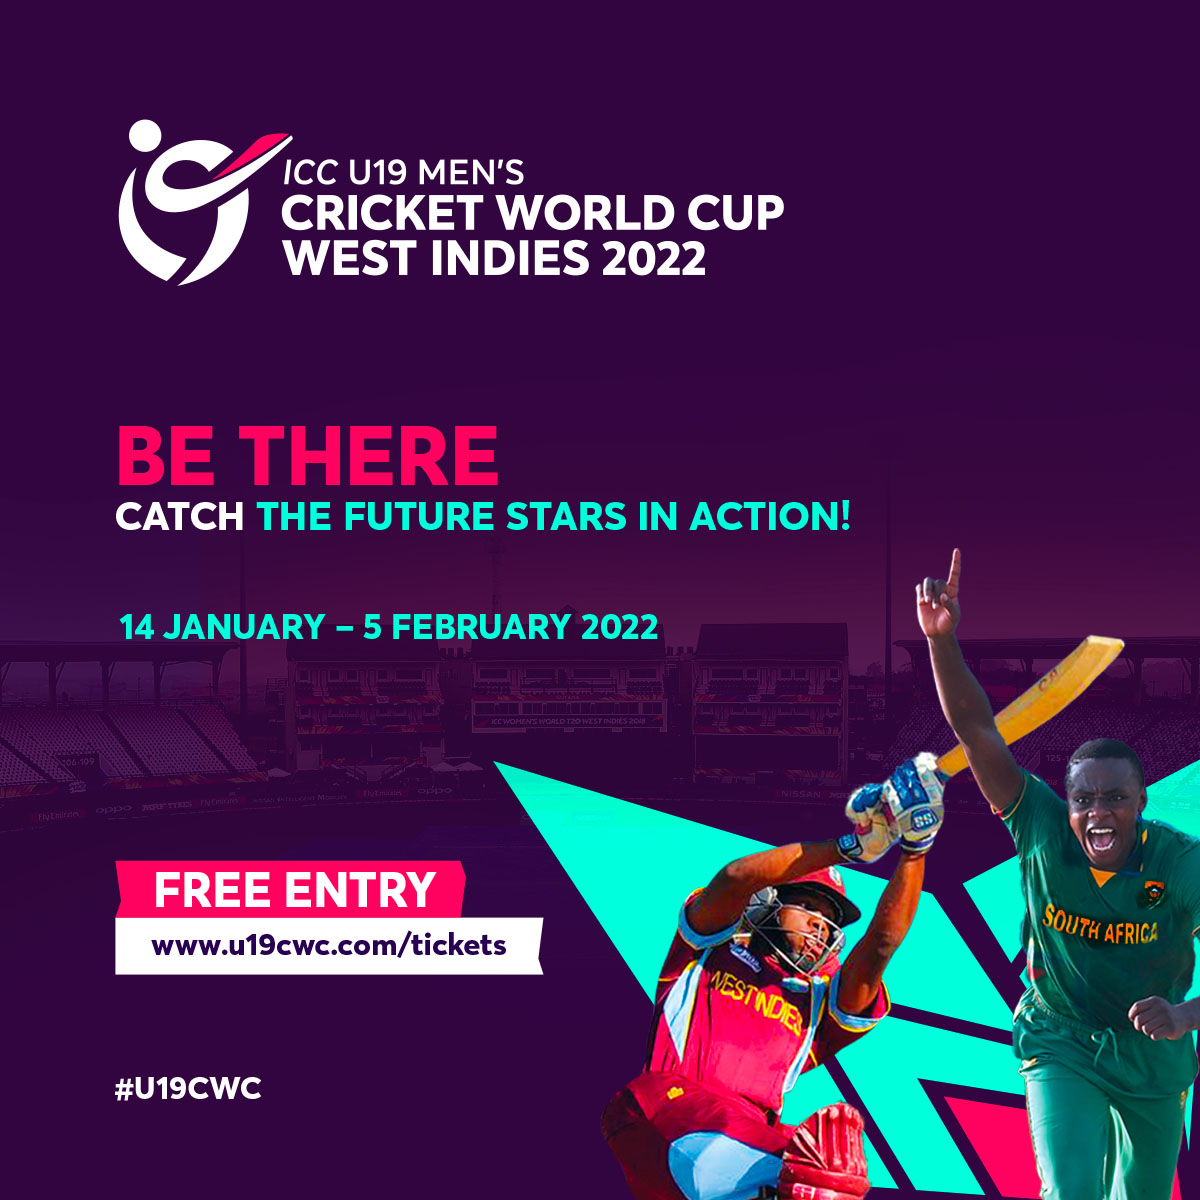 Be There’ Free Entry To ICC U19 Men’s Cricket World Cup 2022 Matches